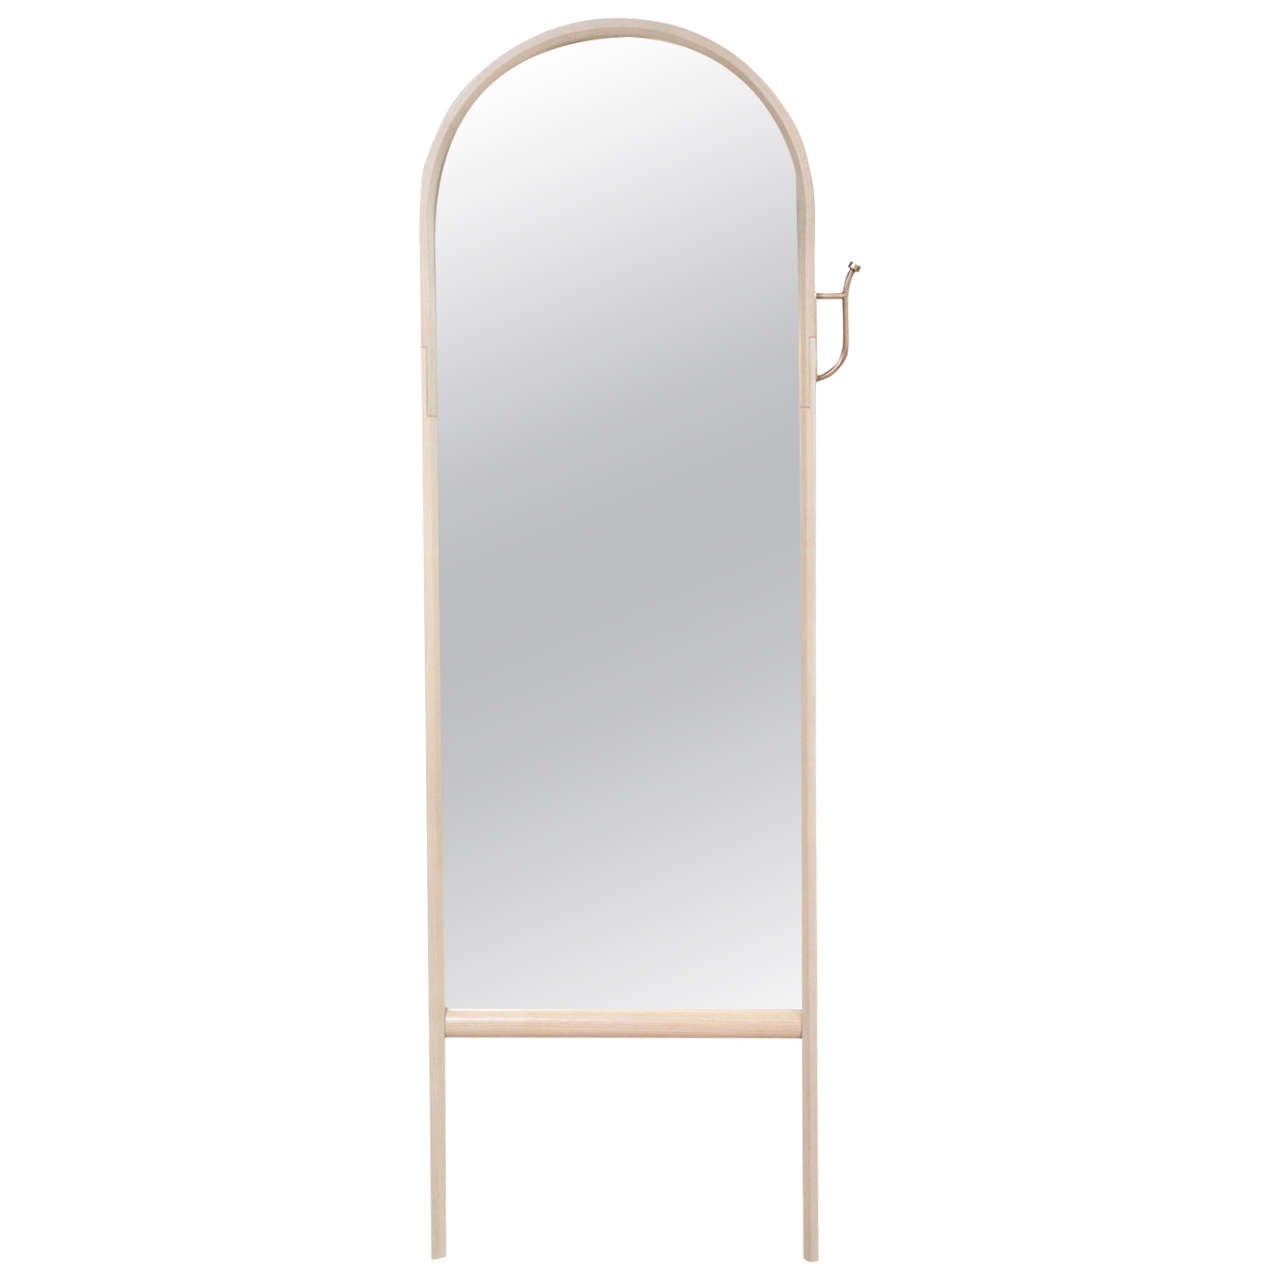 Paniolo Floor Mirror by O&G Studio in Oyster Stain on Ashwood